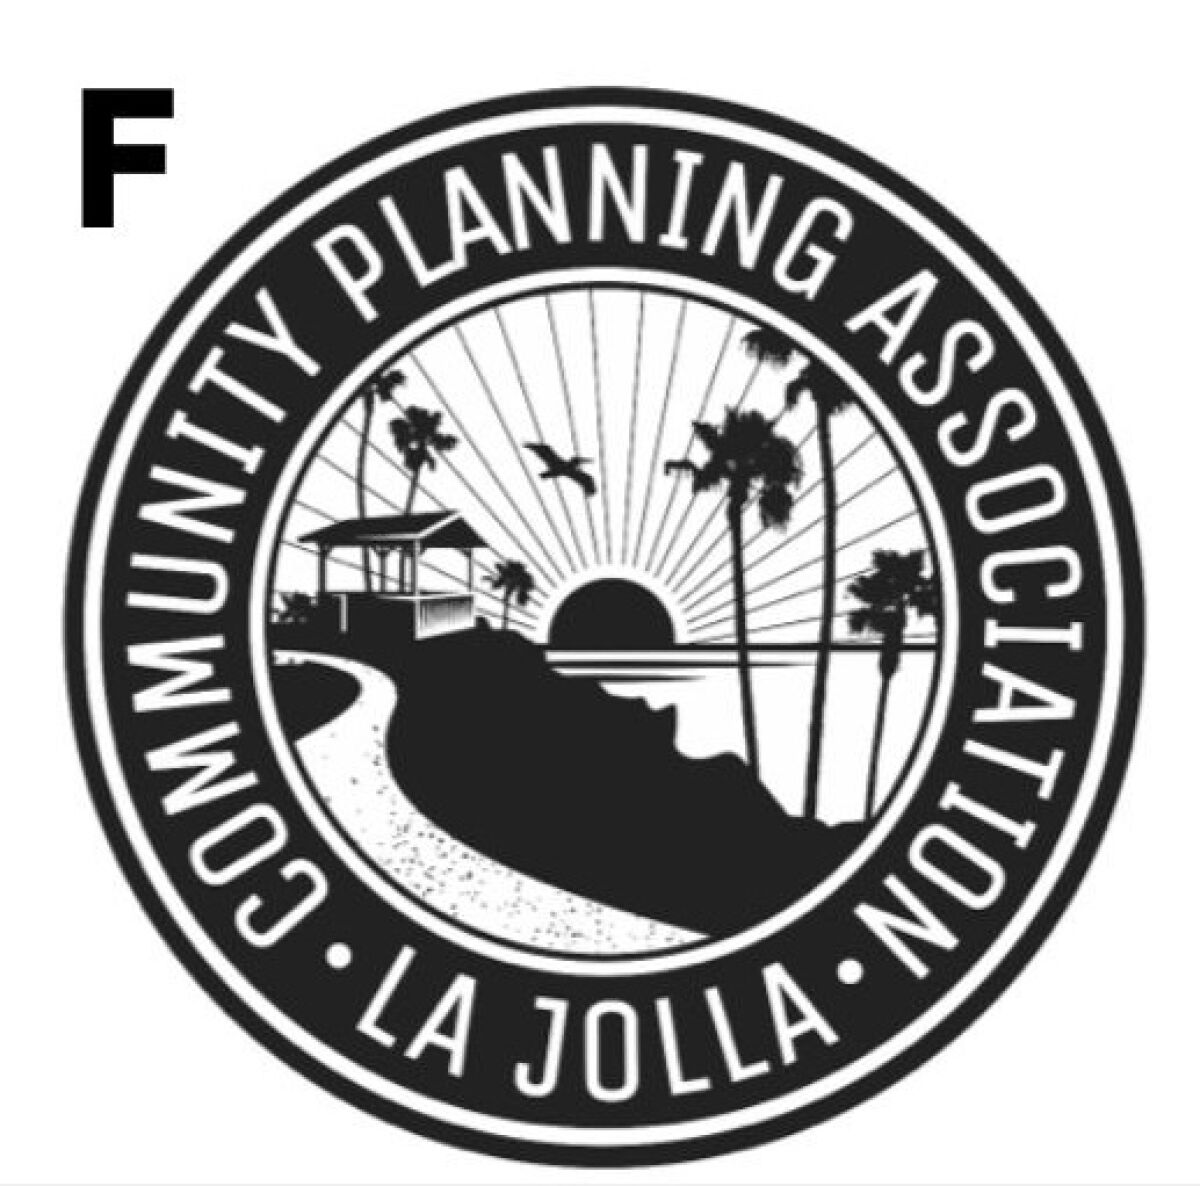 This is the favorite for a new La Jolla Community Planning Association logo.